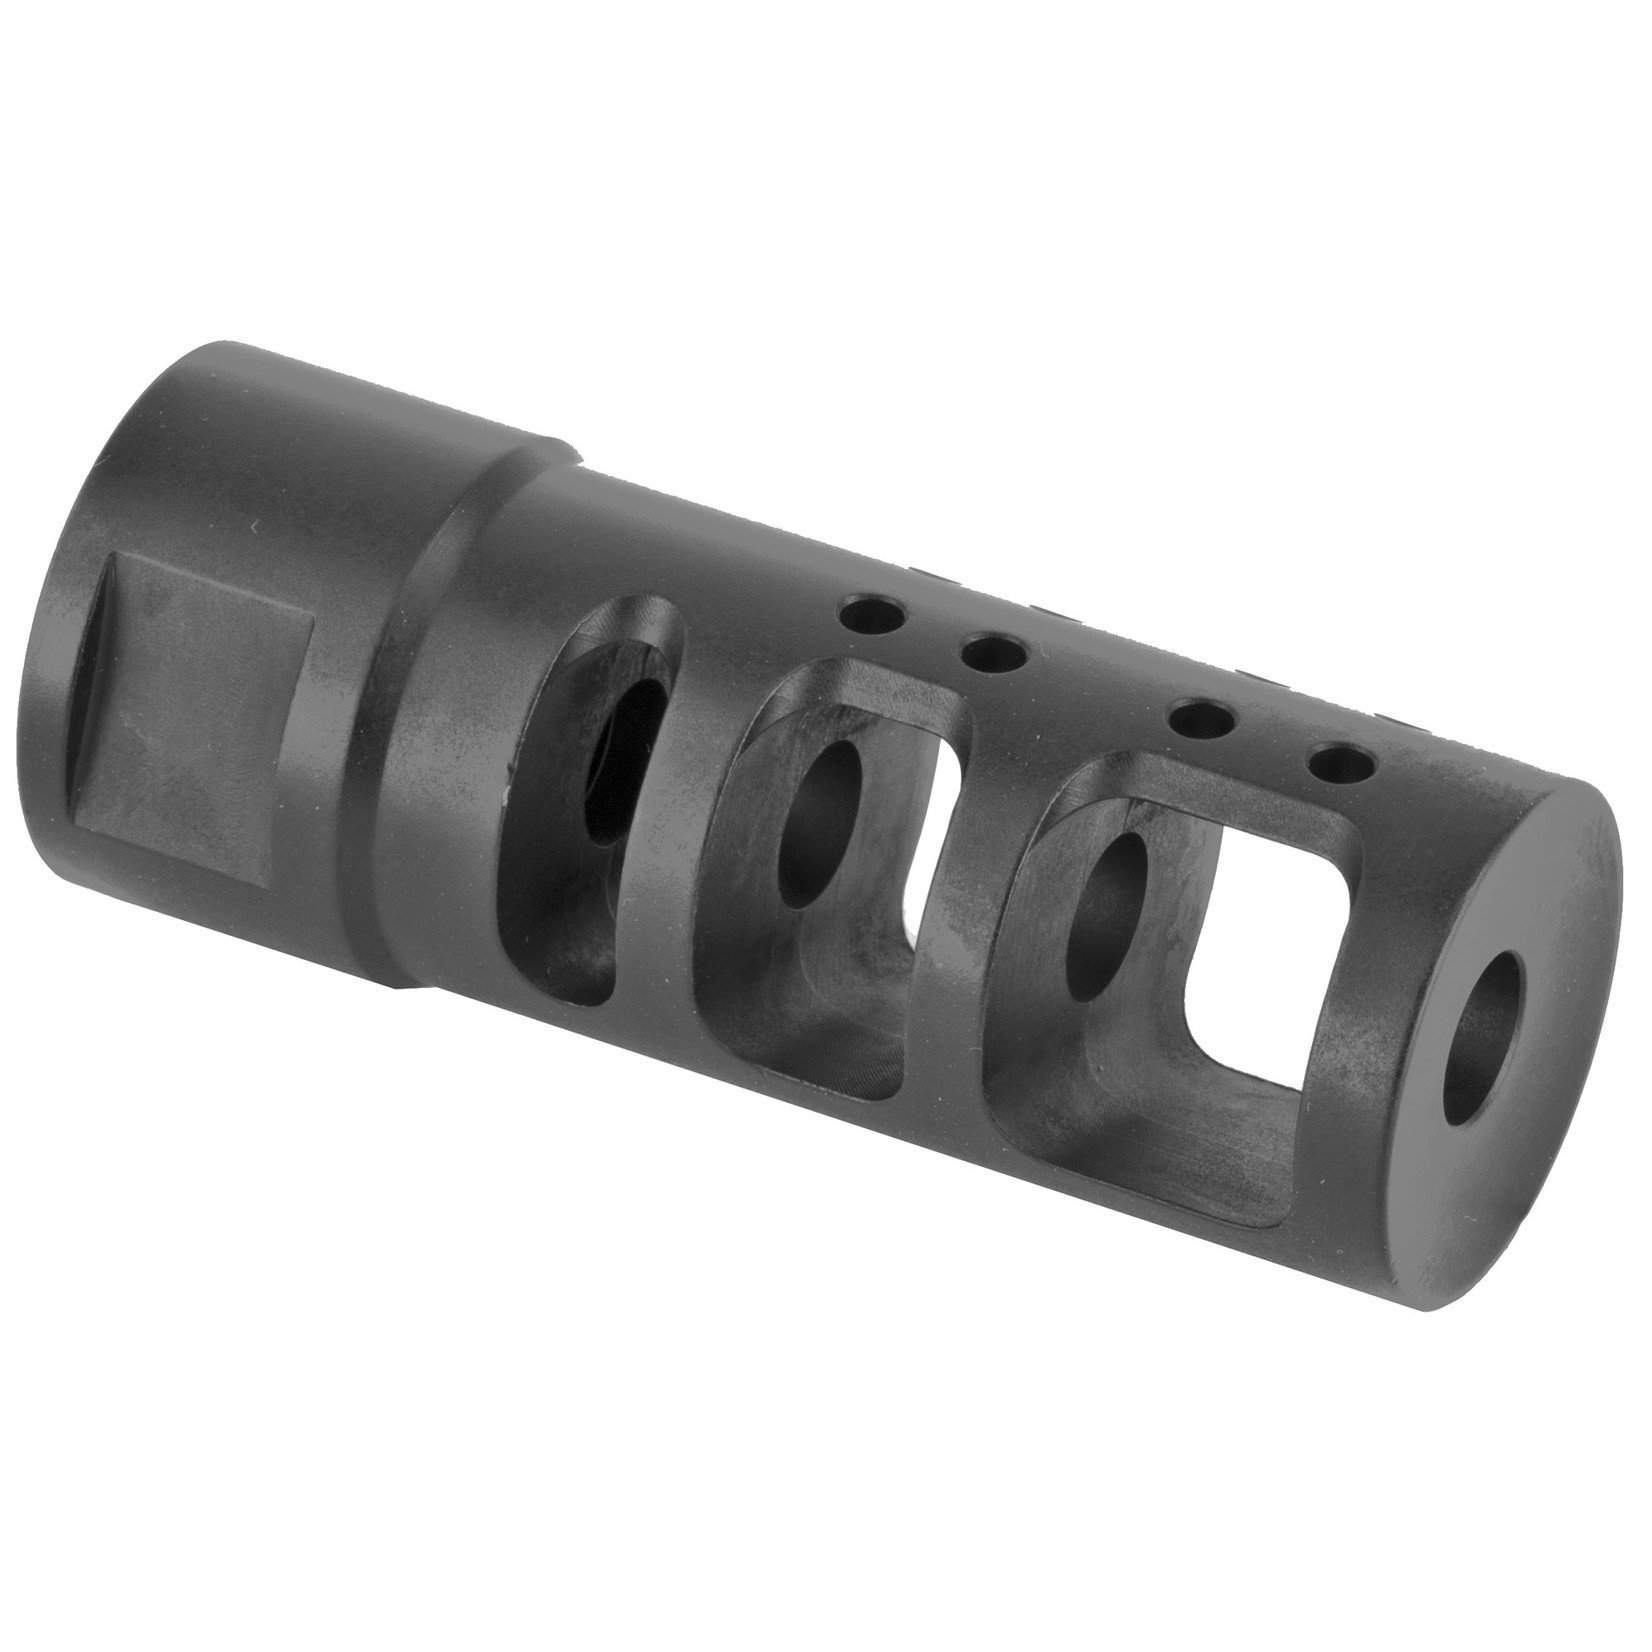 Spike's Tactical SPIKE'S R2 MUZZLE BRAKE 5.56 BLK